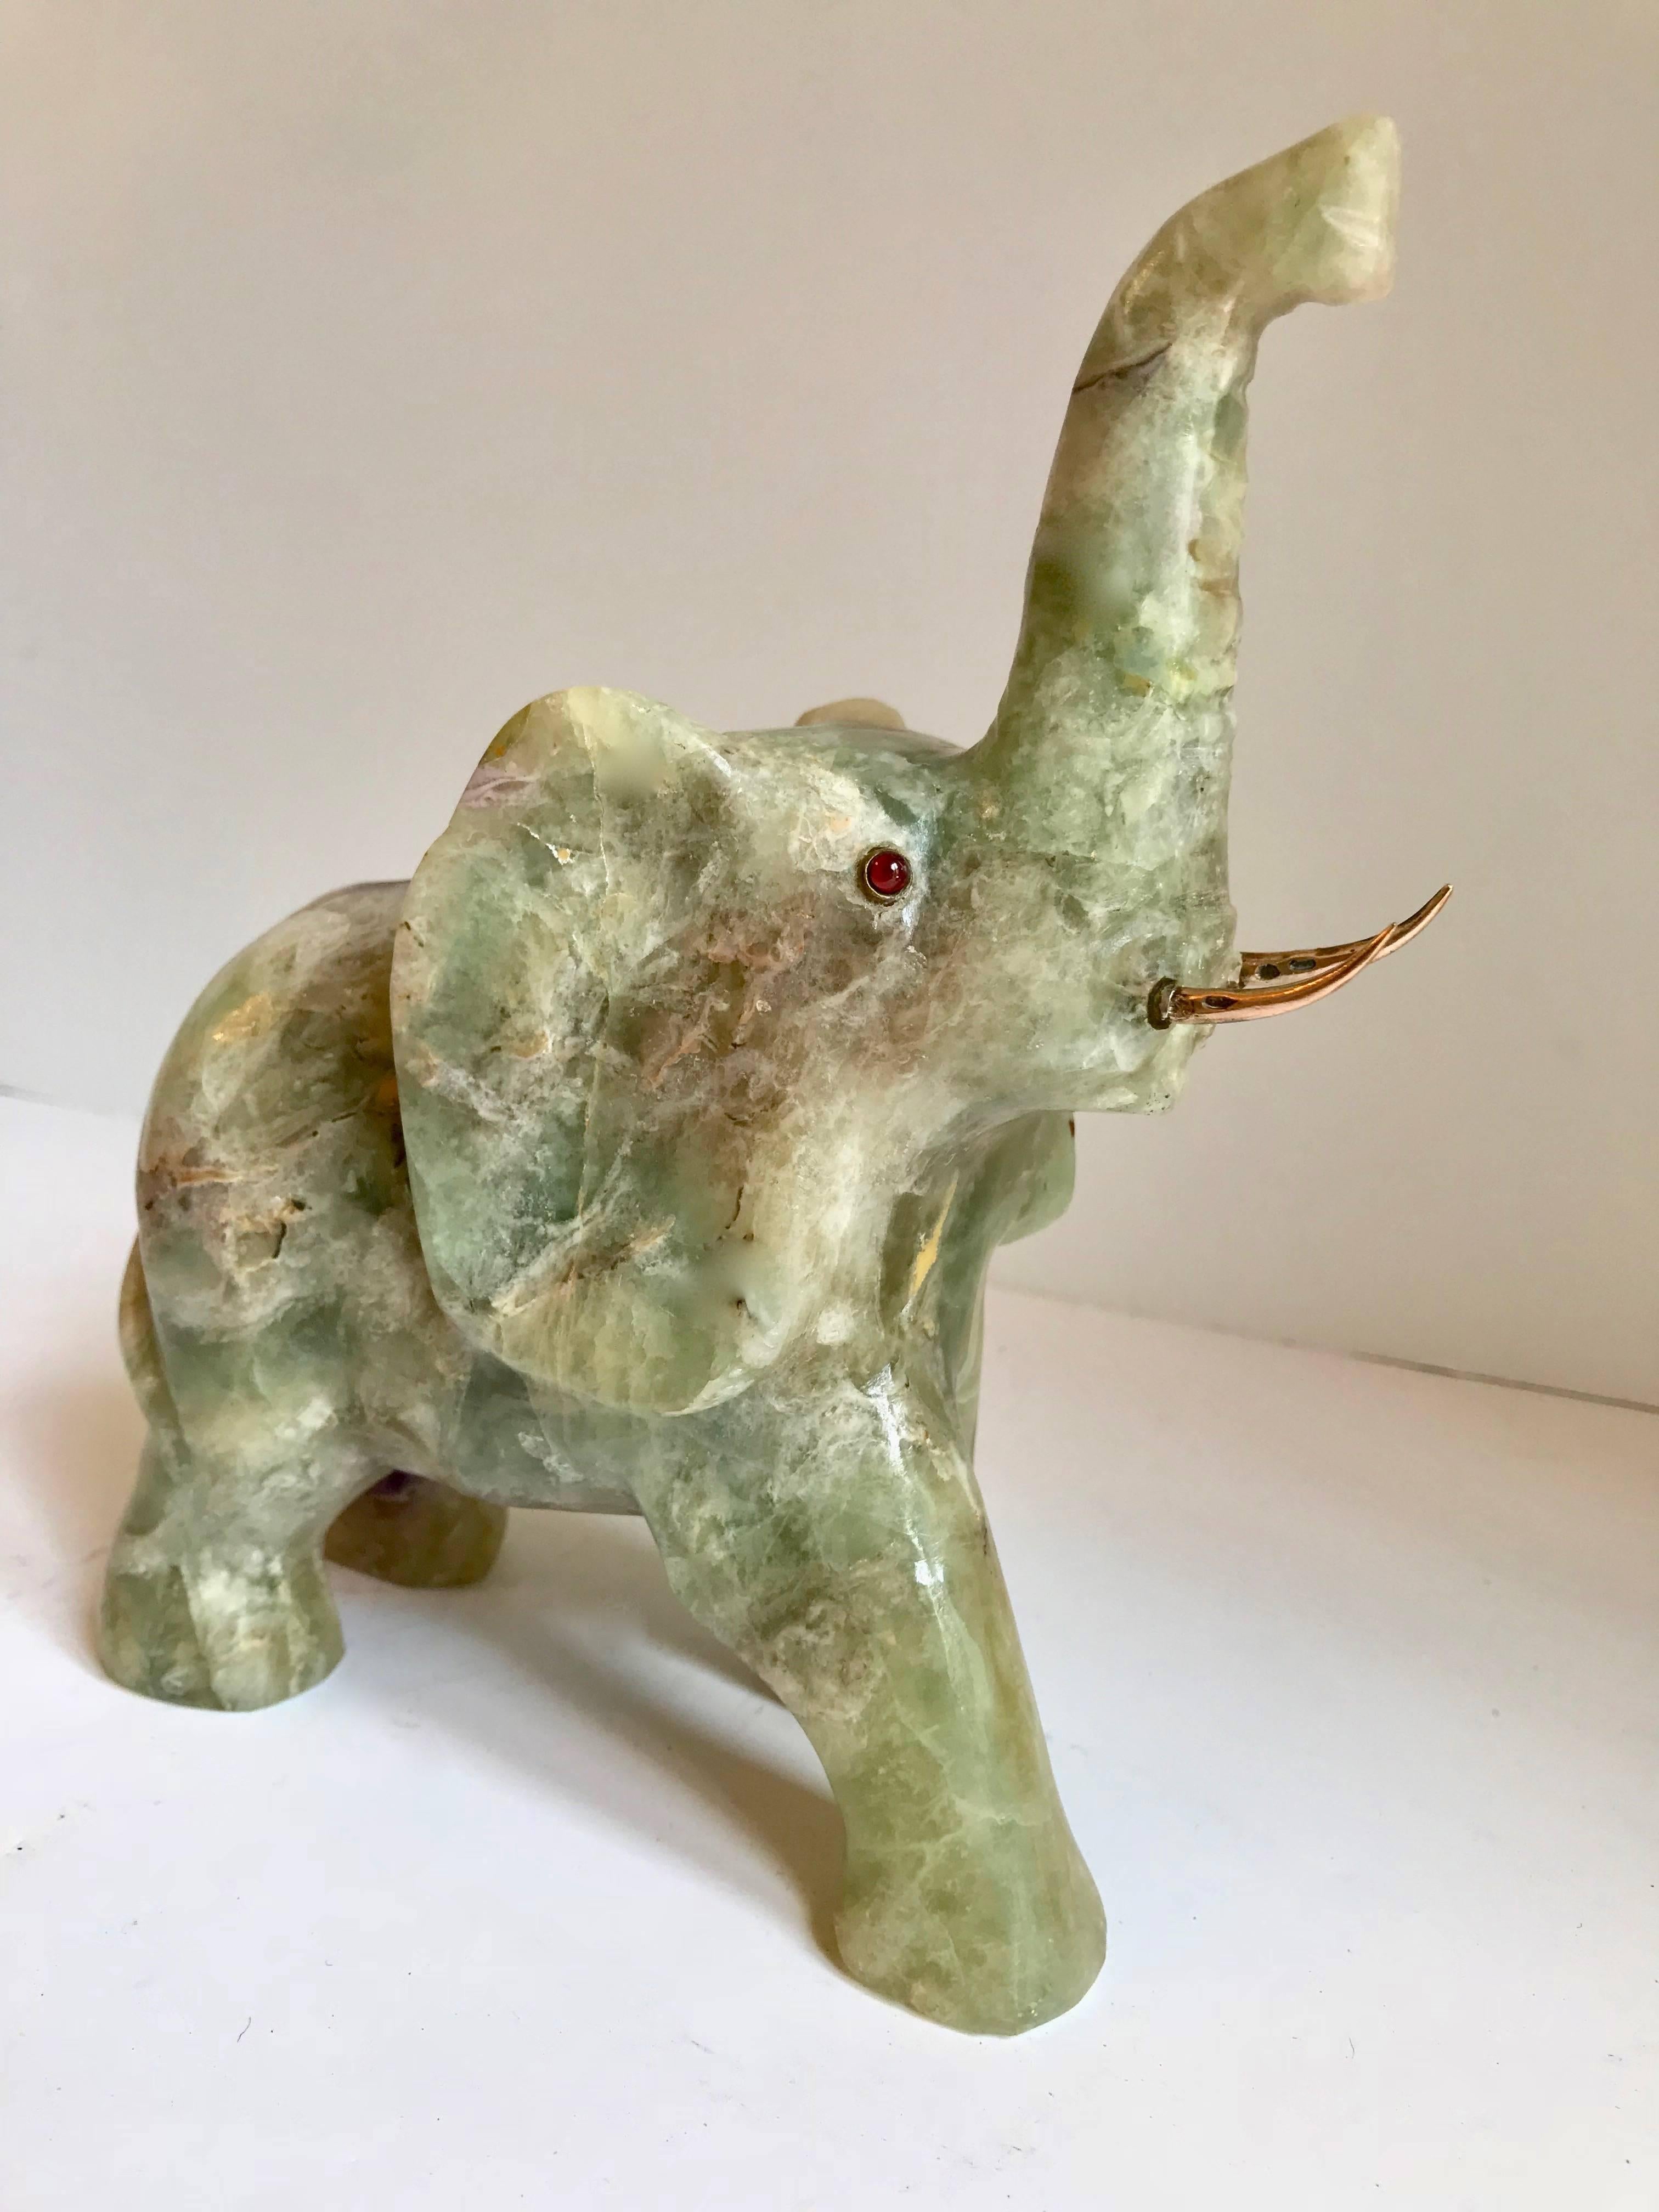 Jade elephant with 14-karat gold tusks, a unique jade piece with amber eyes inlaid in sterling. Bring good luck to any shelf or desk in your space, the trunk is up and ready to make all your wishes come true!

Would make a handsome bookend or